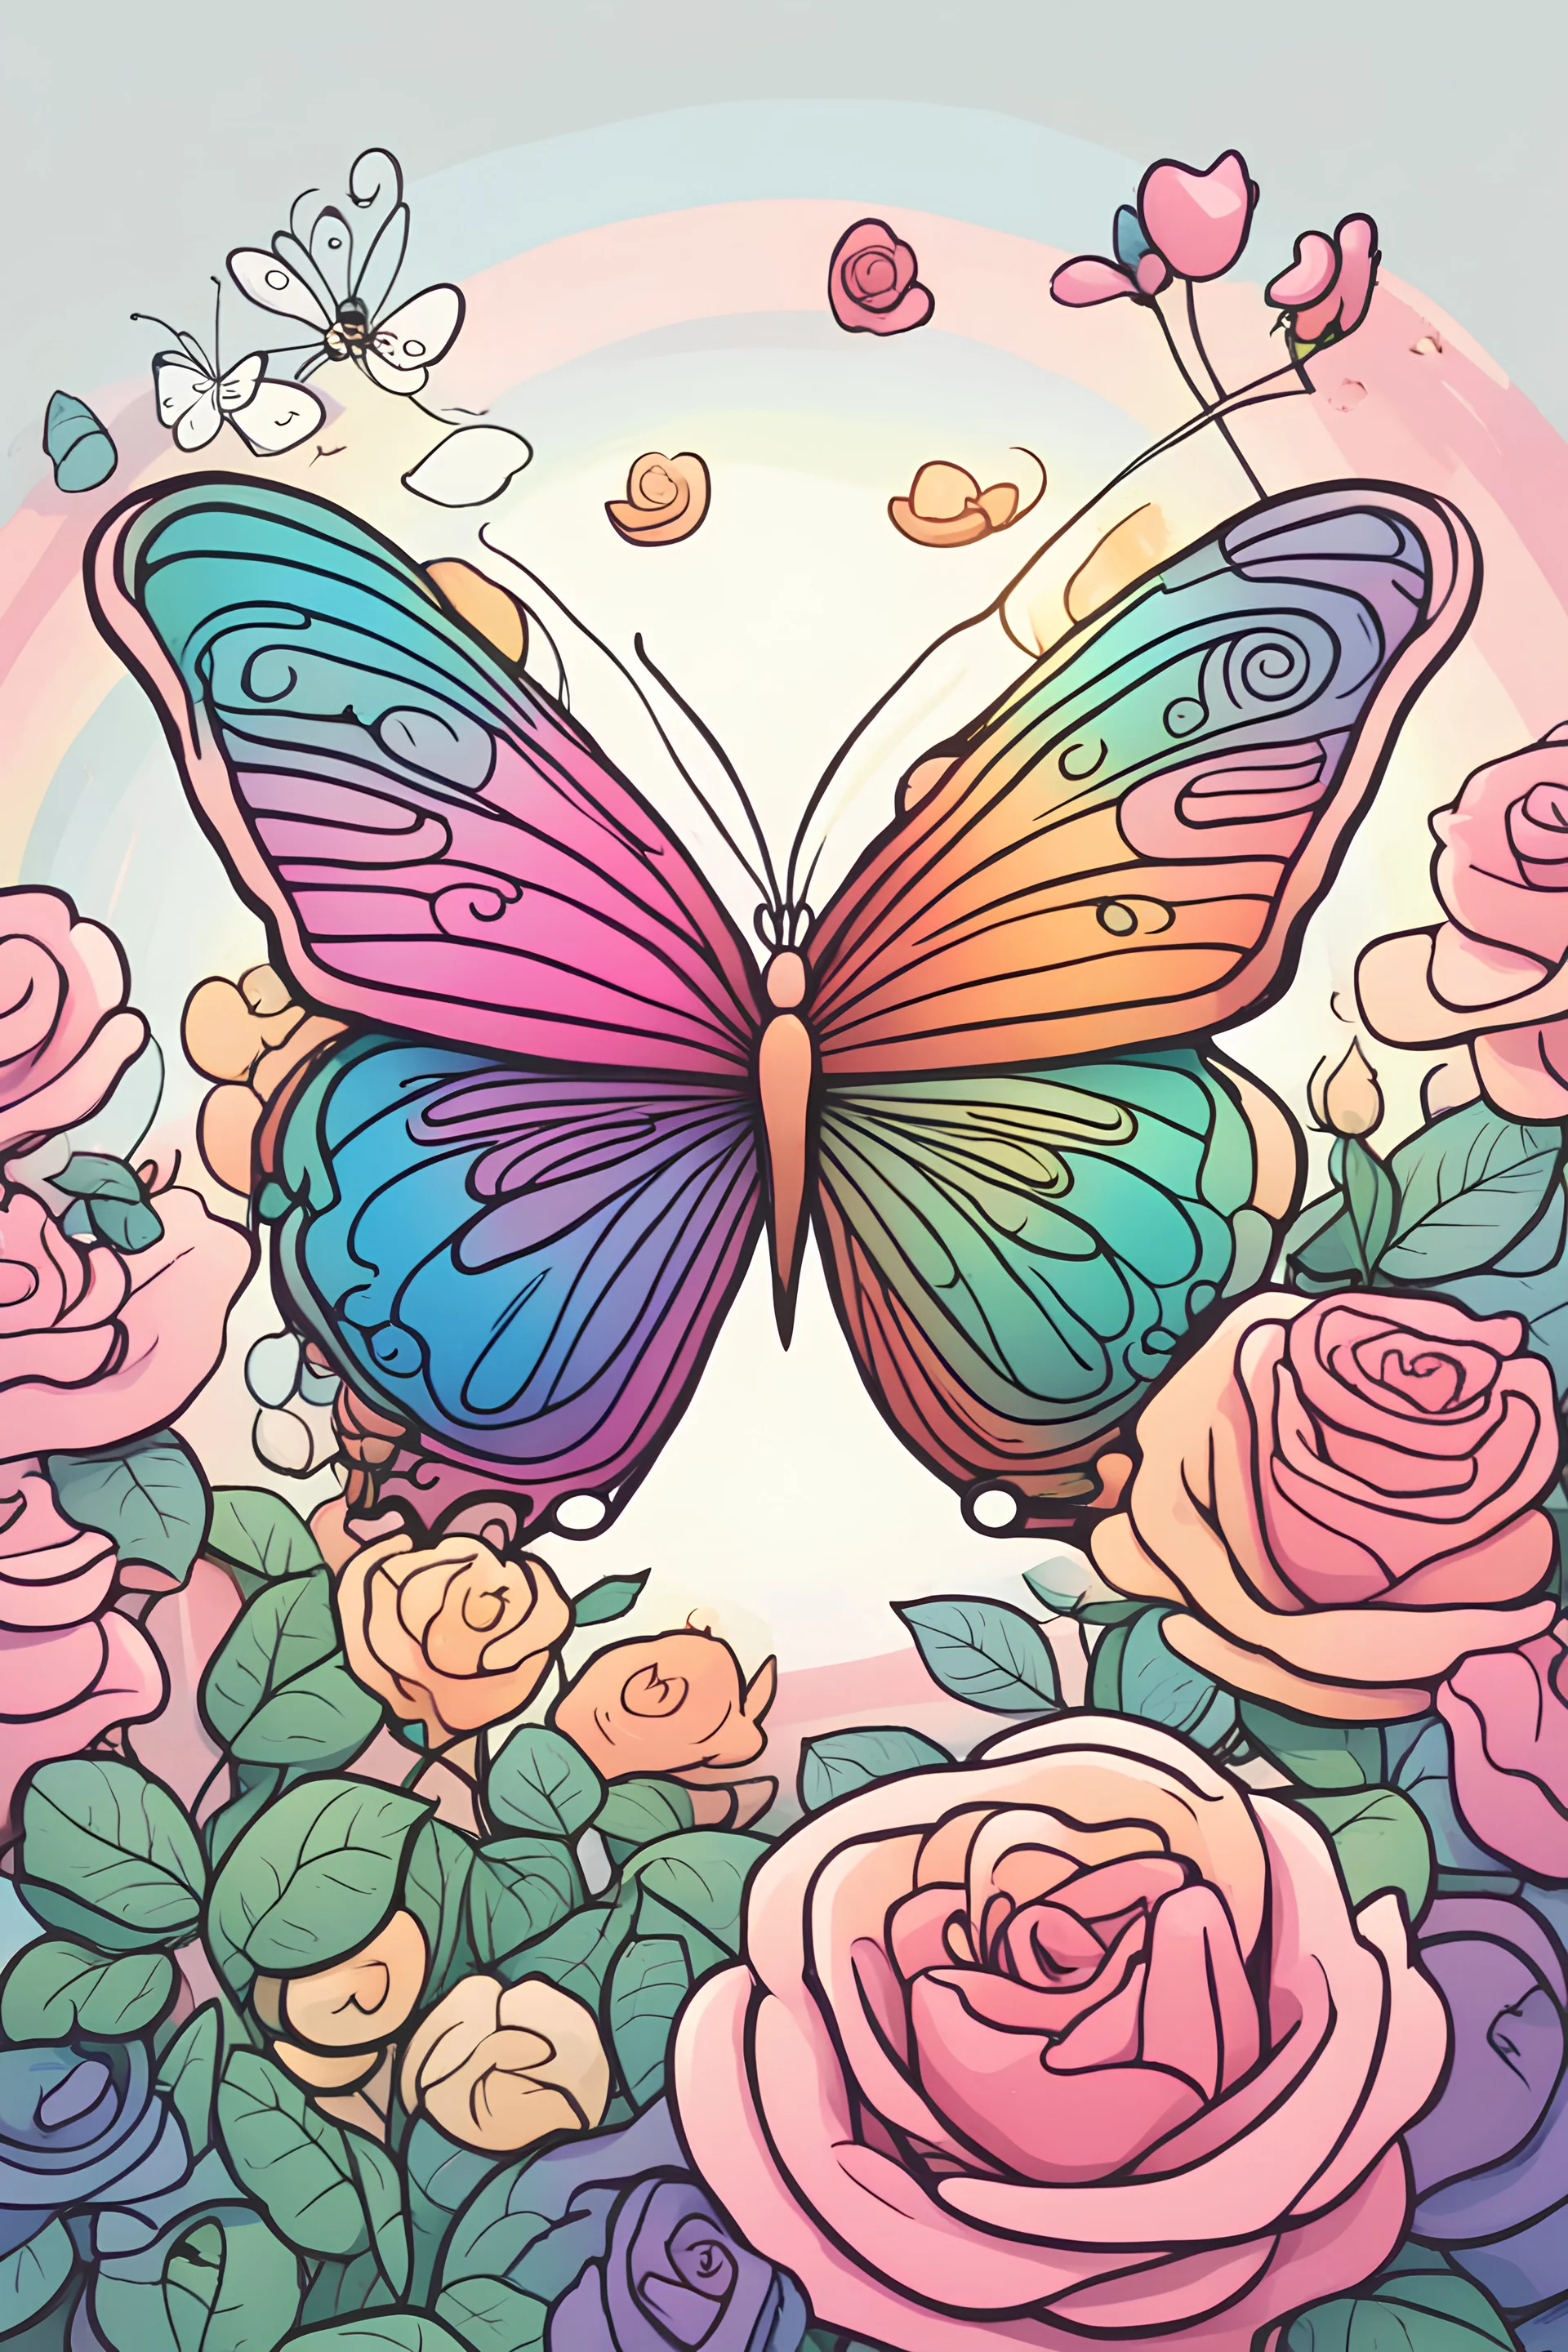 A Cartoon with thick line featuring a butterfly, rainbow, and Rose flowers.